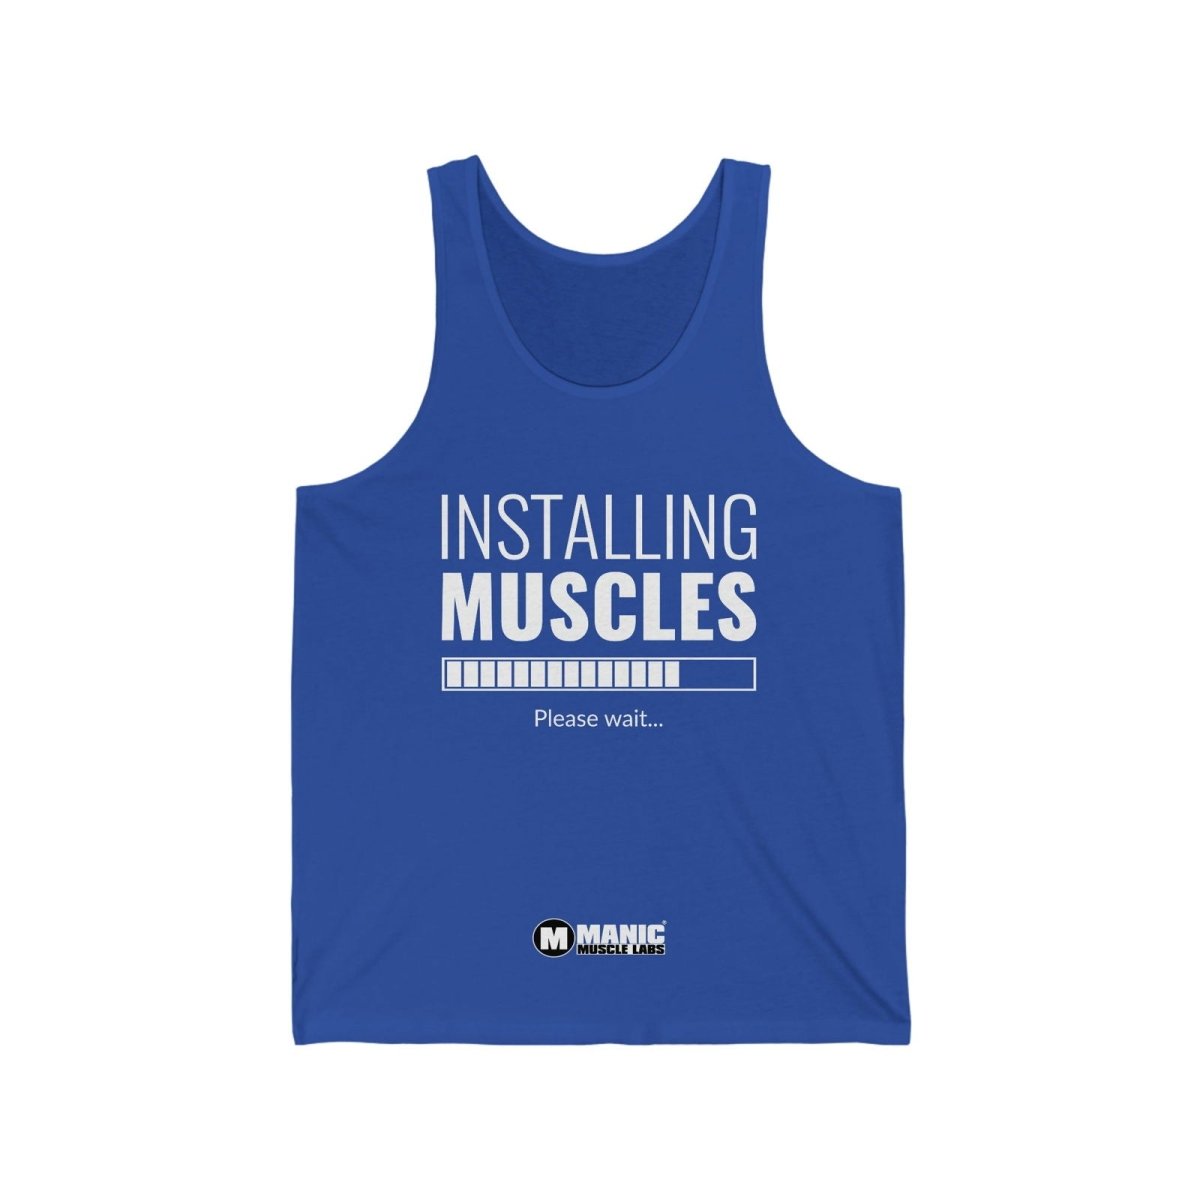 Installing Muscles Jersey Tank - Manic Muscle Labs